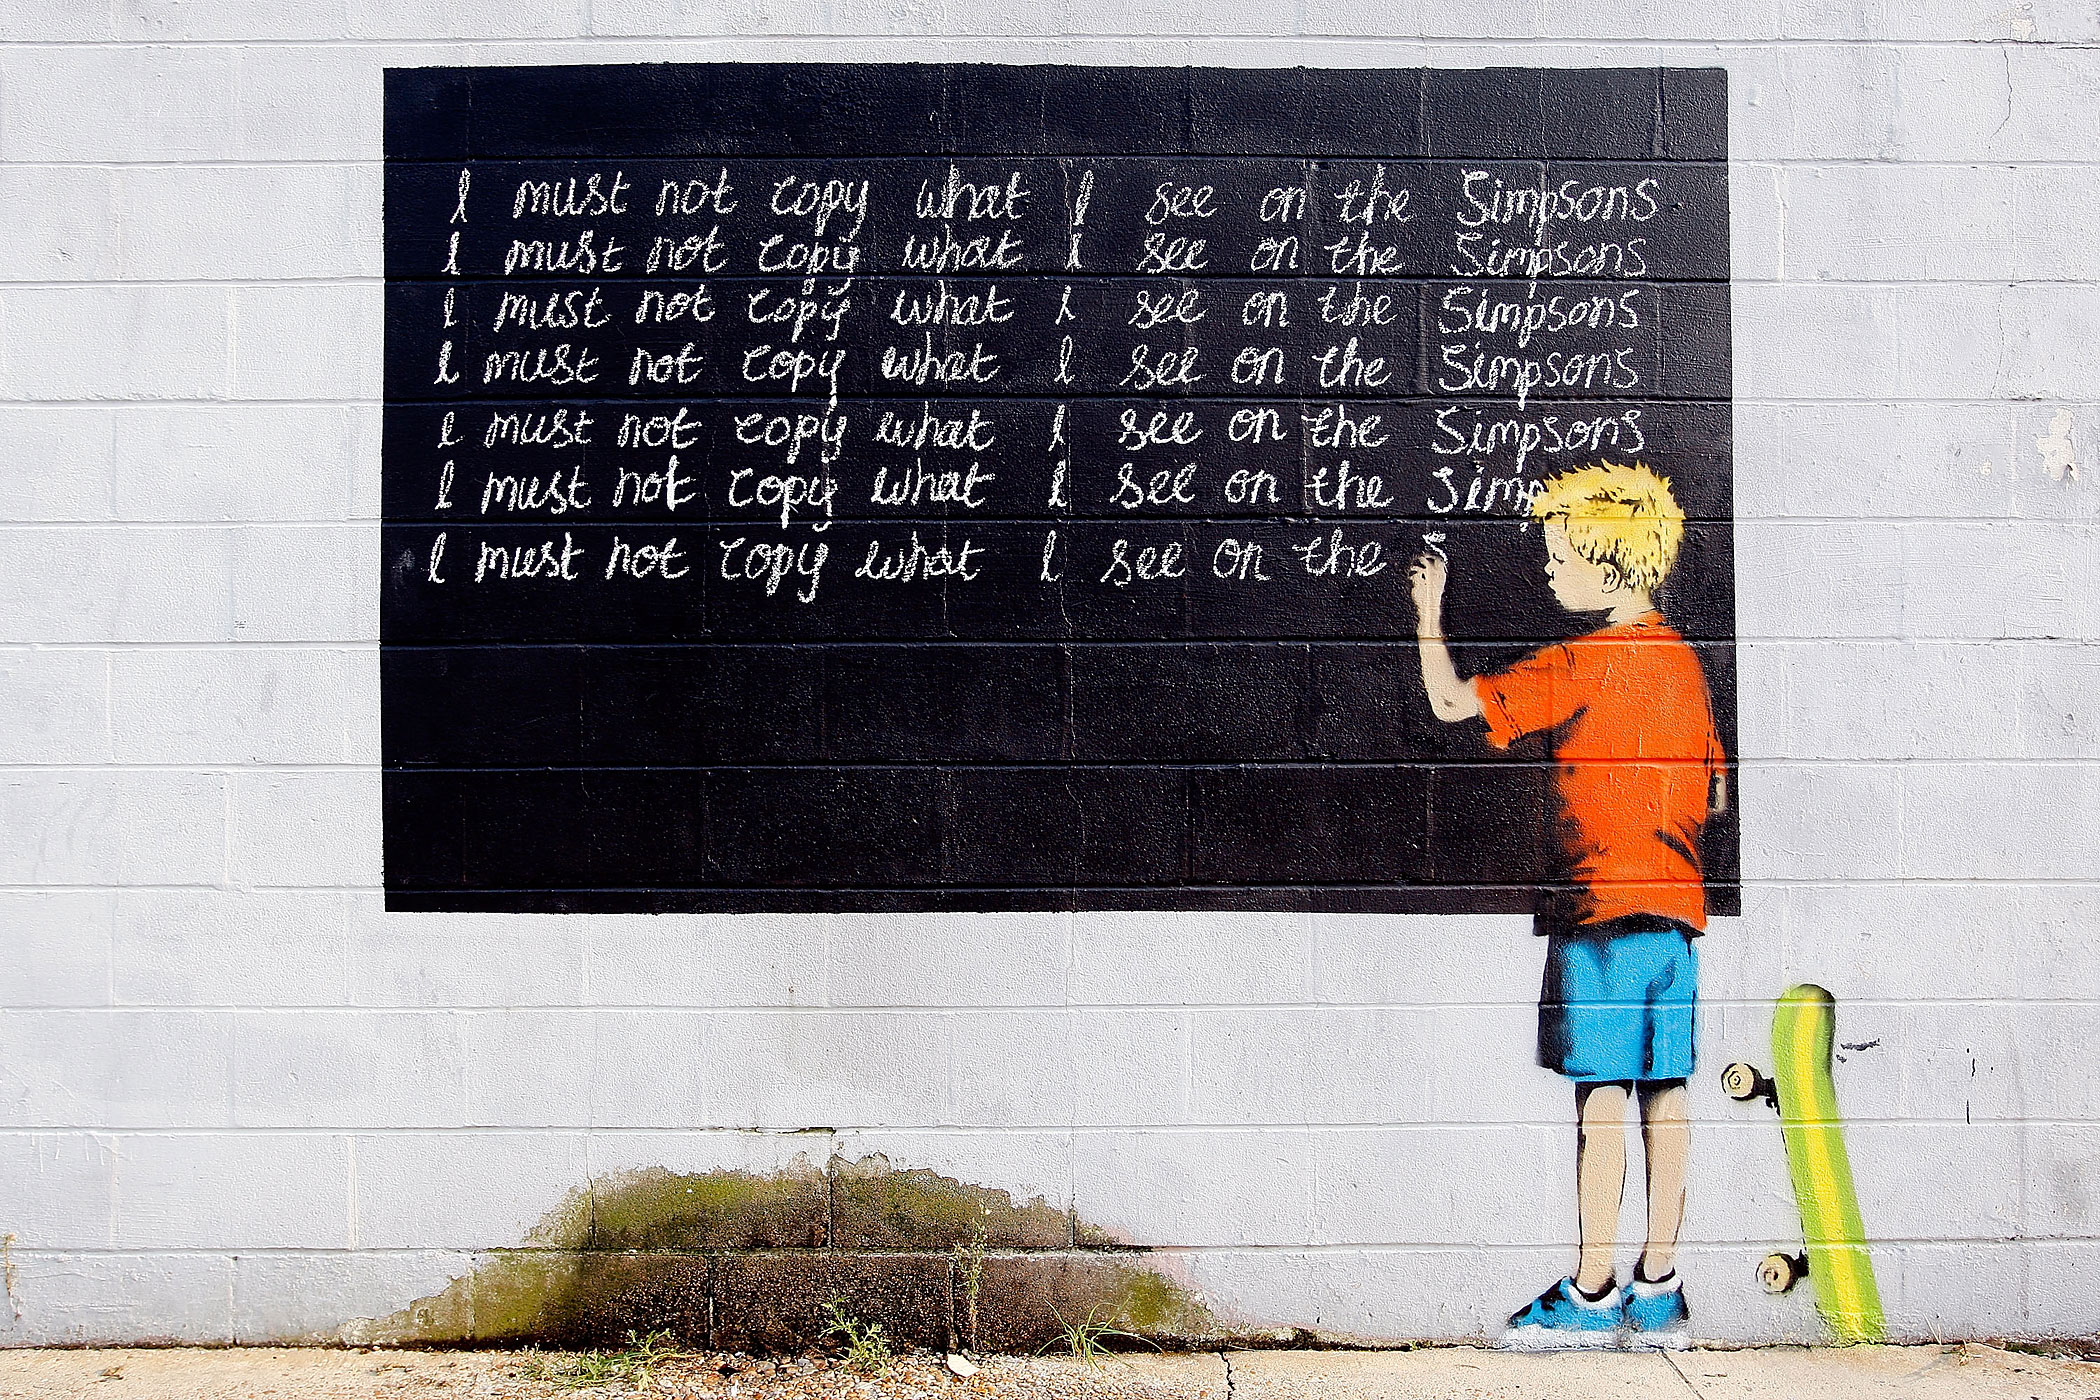 Banksy Graffiti Murals Pop Up Around New Orleans, Including Levee Wall